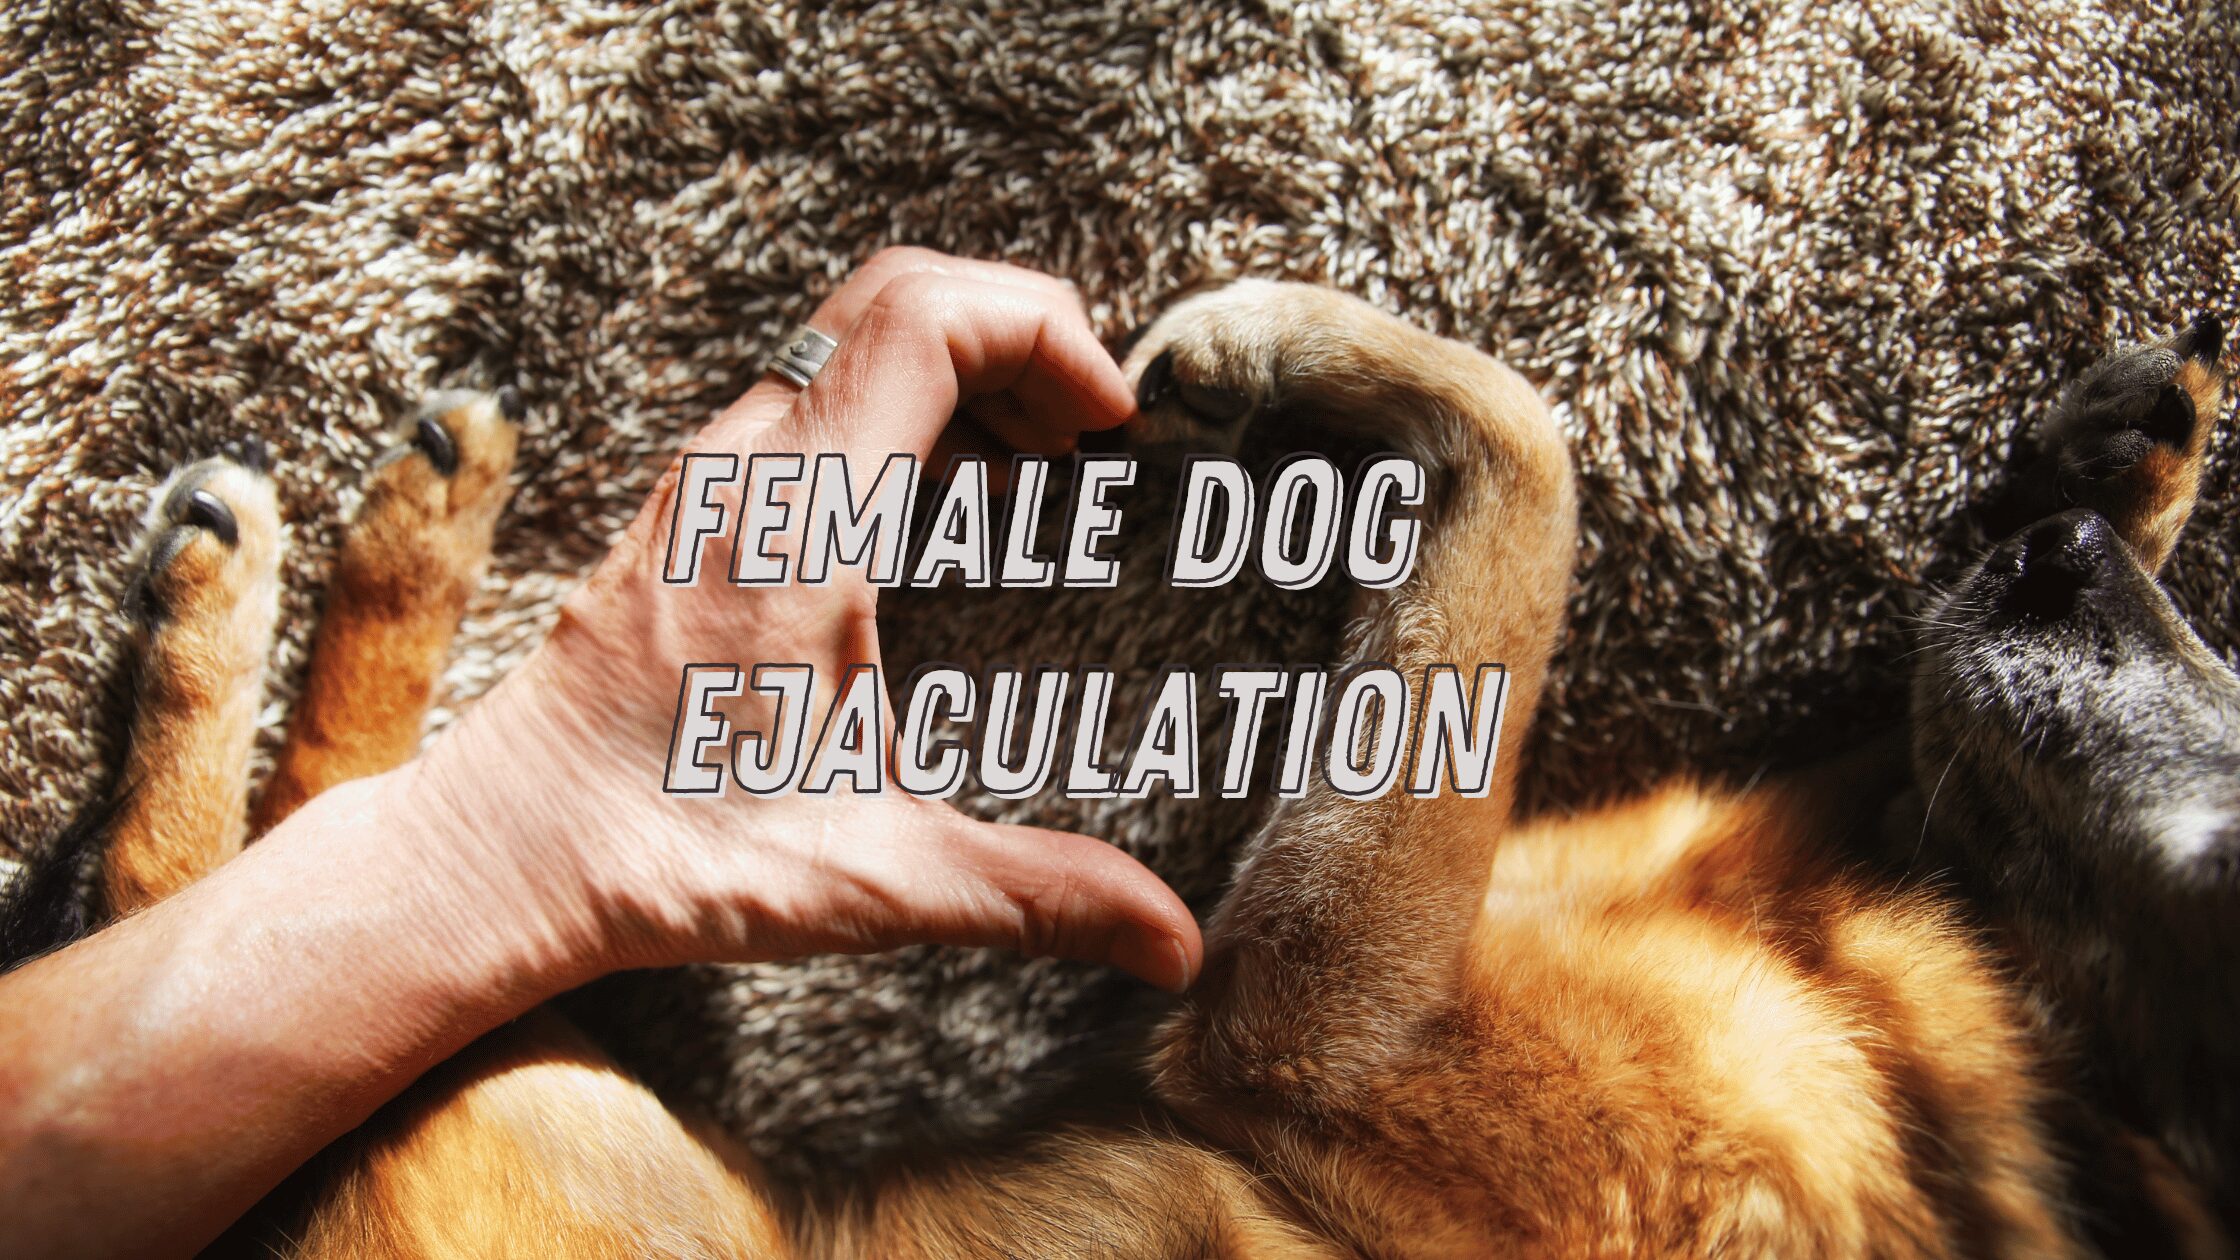 Does My Dog Ejaculate? Unraveling Canine Myths and Biology